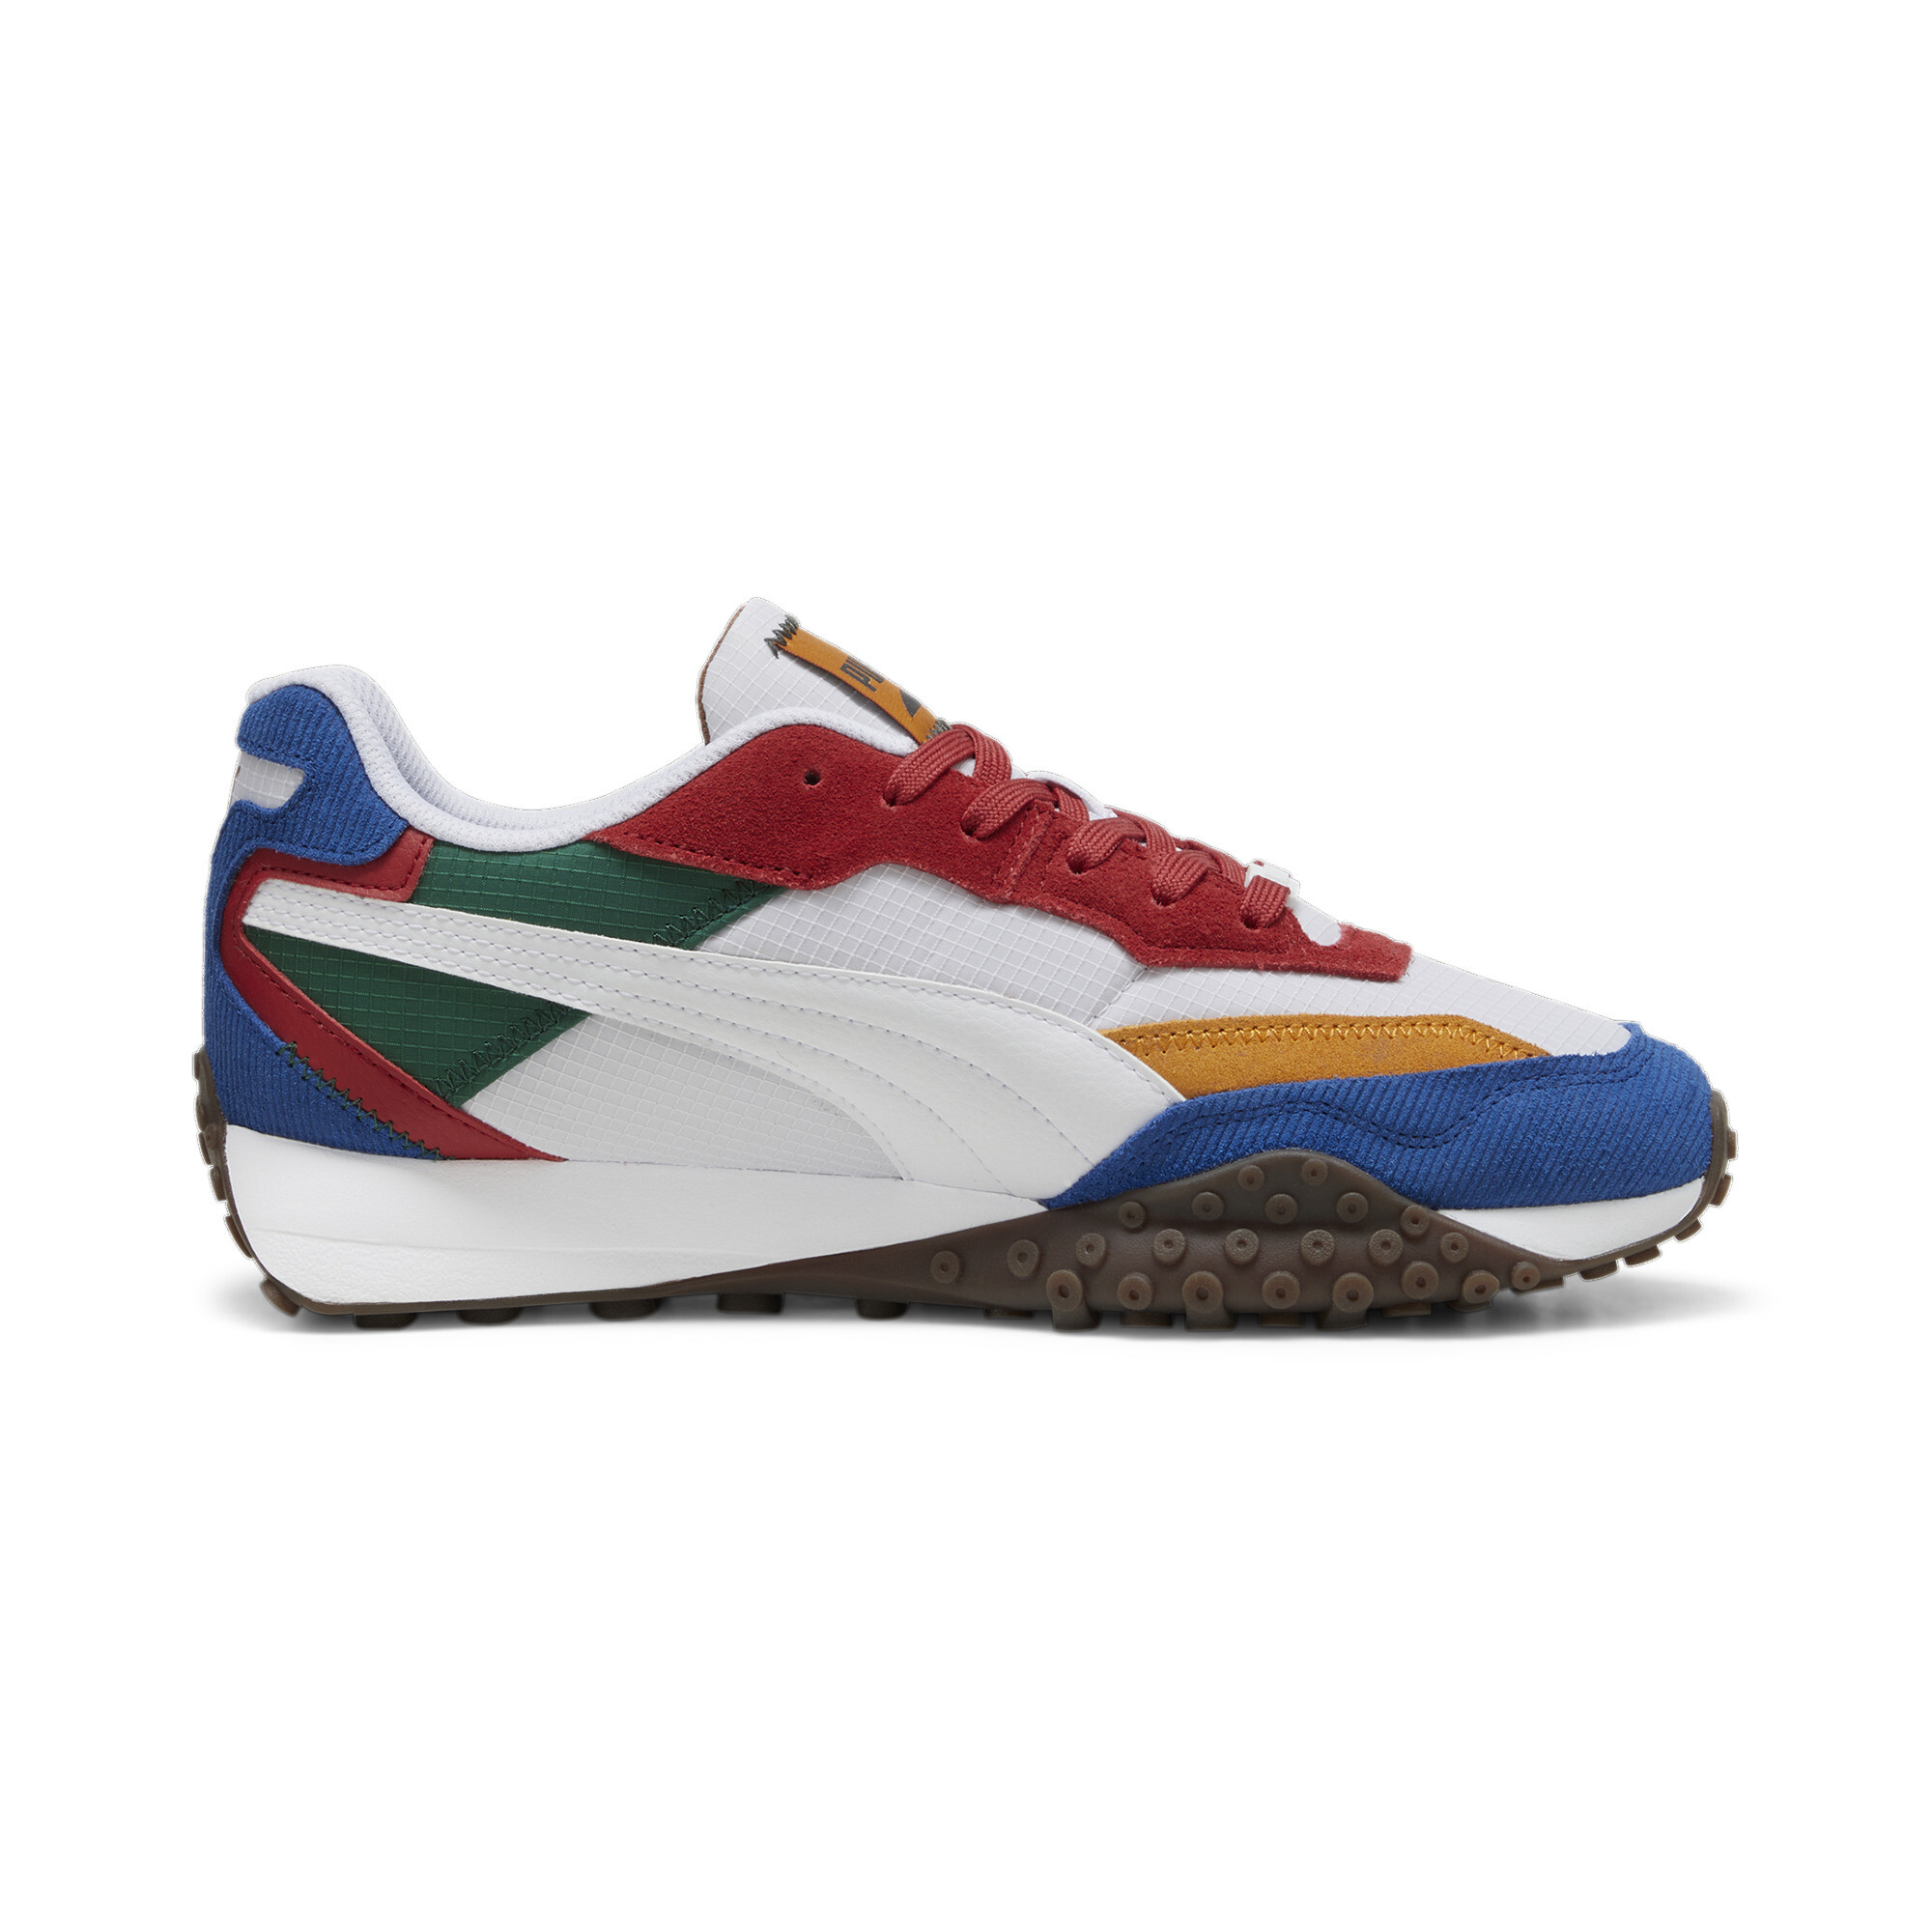 Puma Blktop Rider Multicolor Sneakers, White, Size 39, Shoes